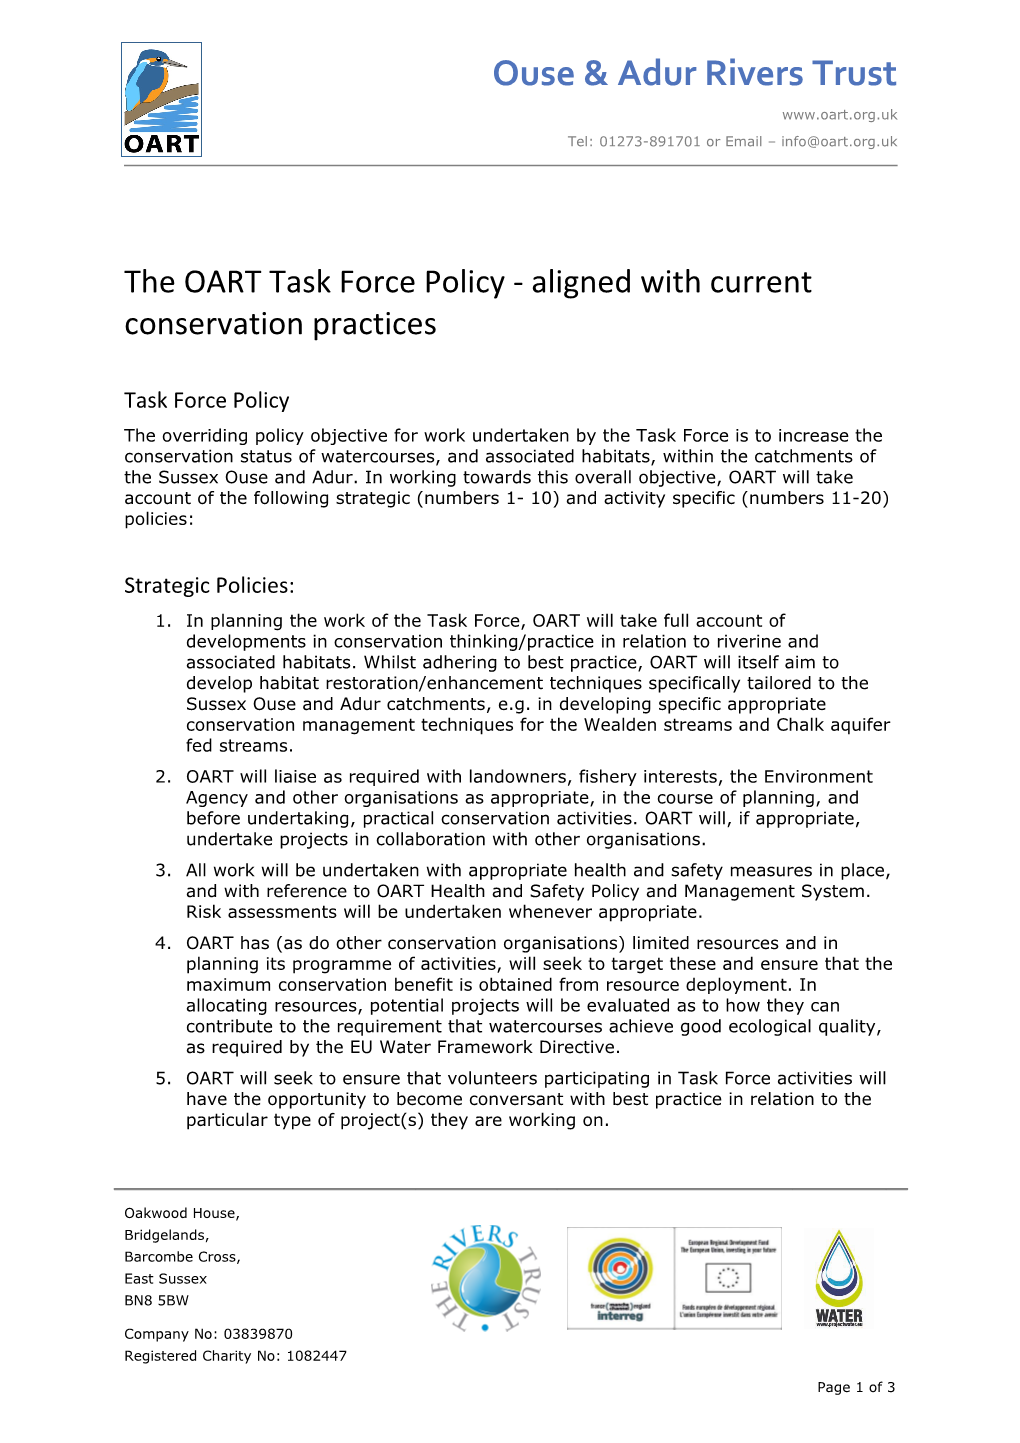 The OART Task Force Policy - Aligned with Current Conservation Practices